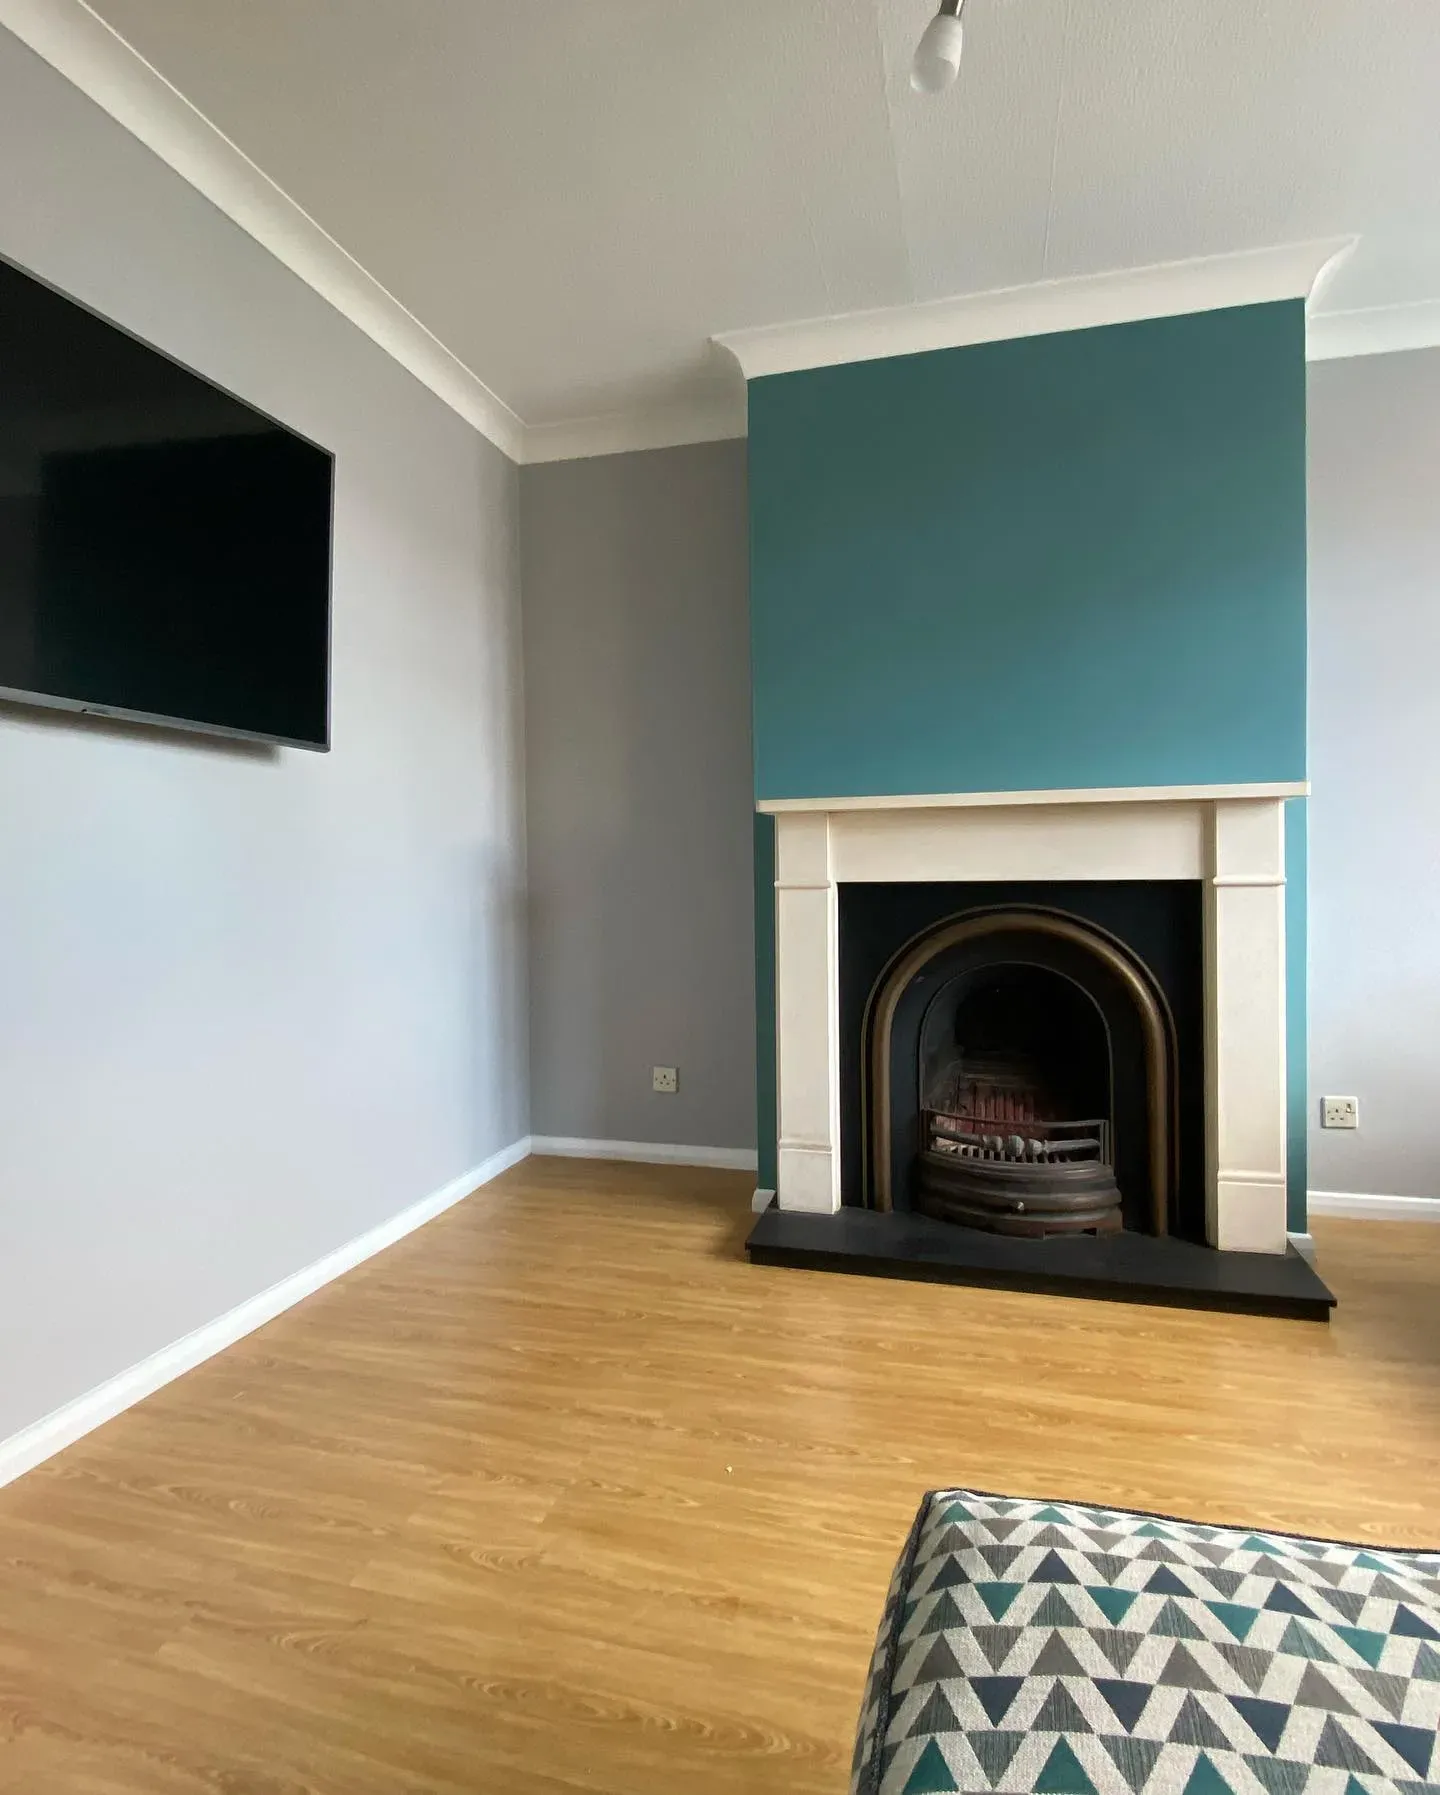 Dulux Maritime Teal victorian living room fireplace 